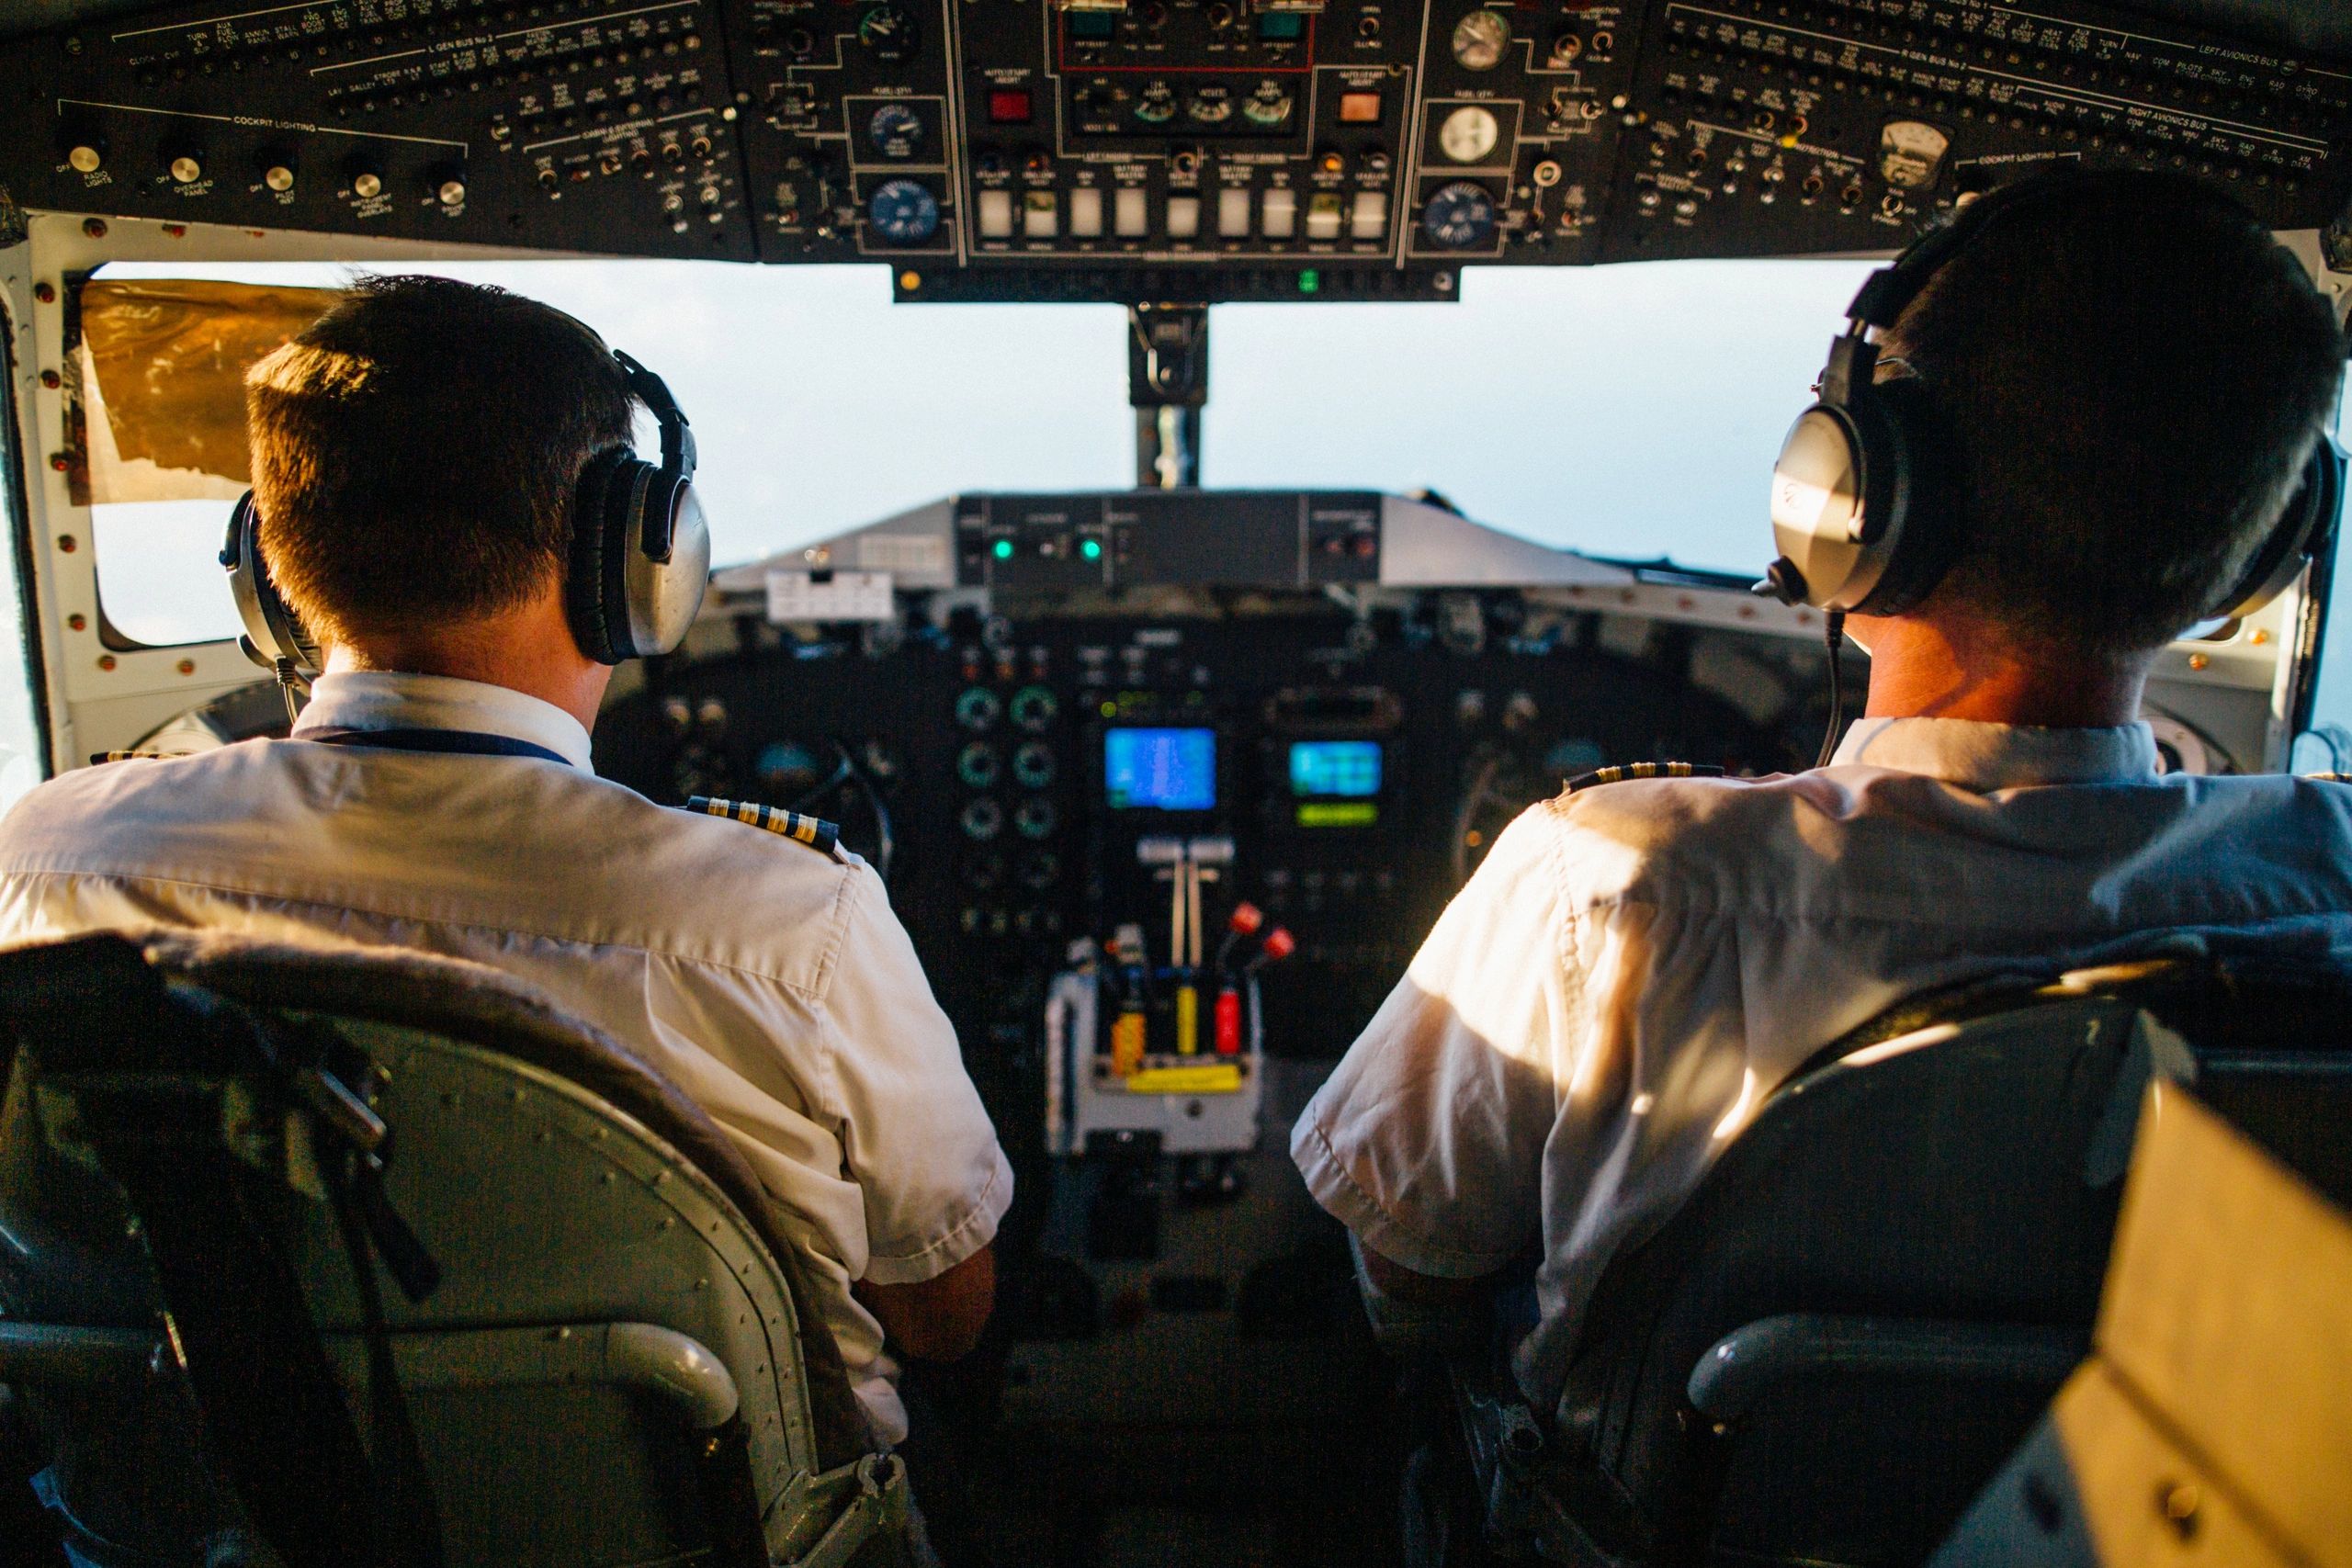 Two pilots sitting in a cockpit of an airplane